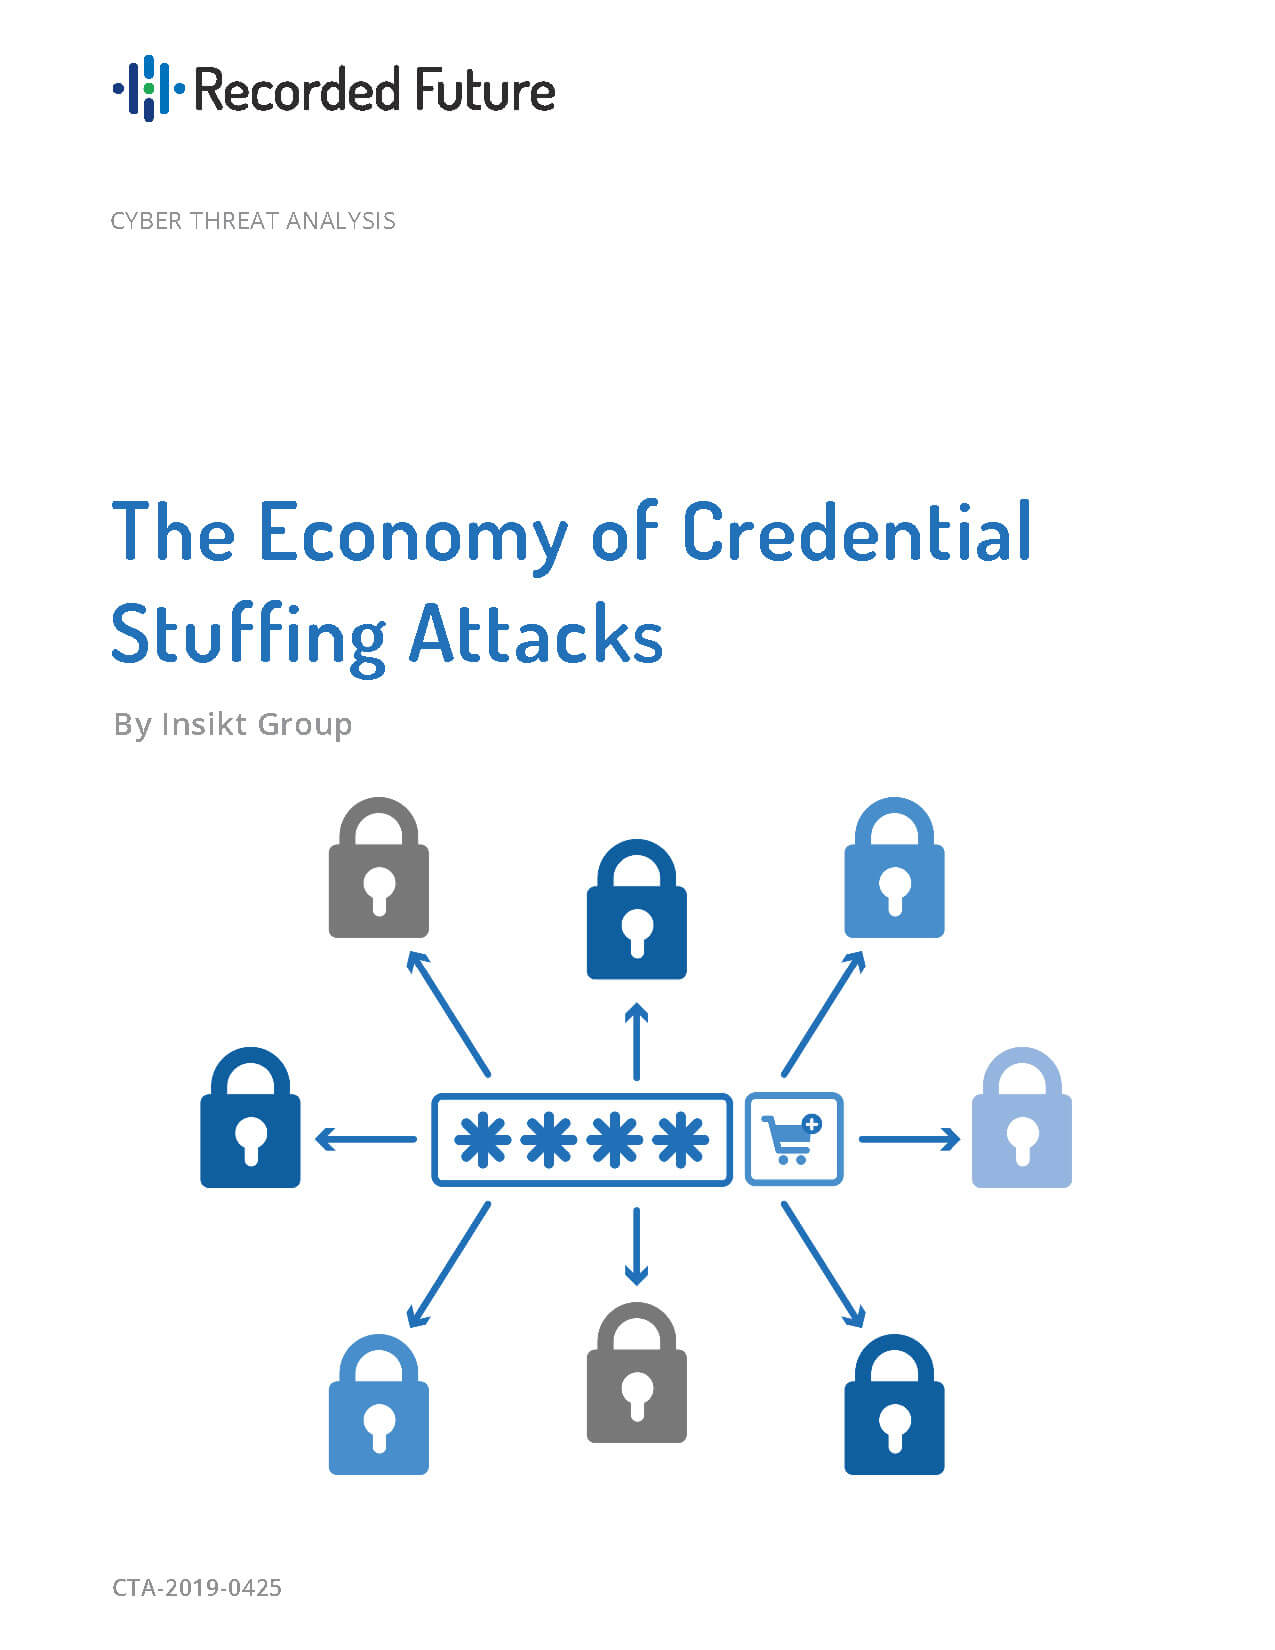 The Economy of Credential Stuffing Attacks